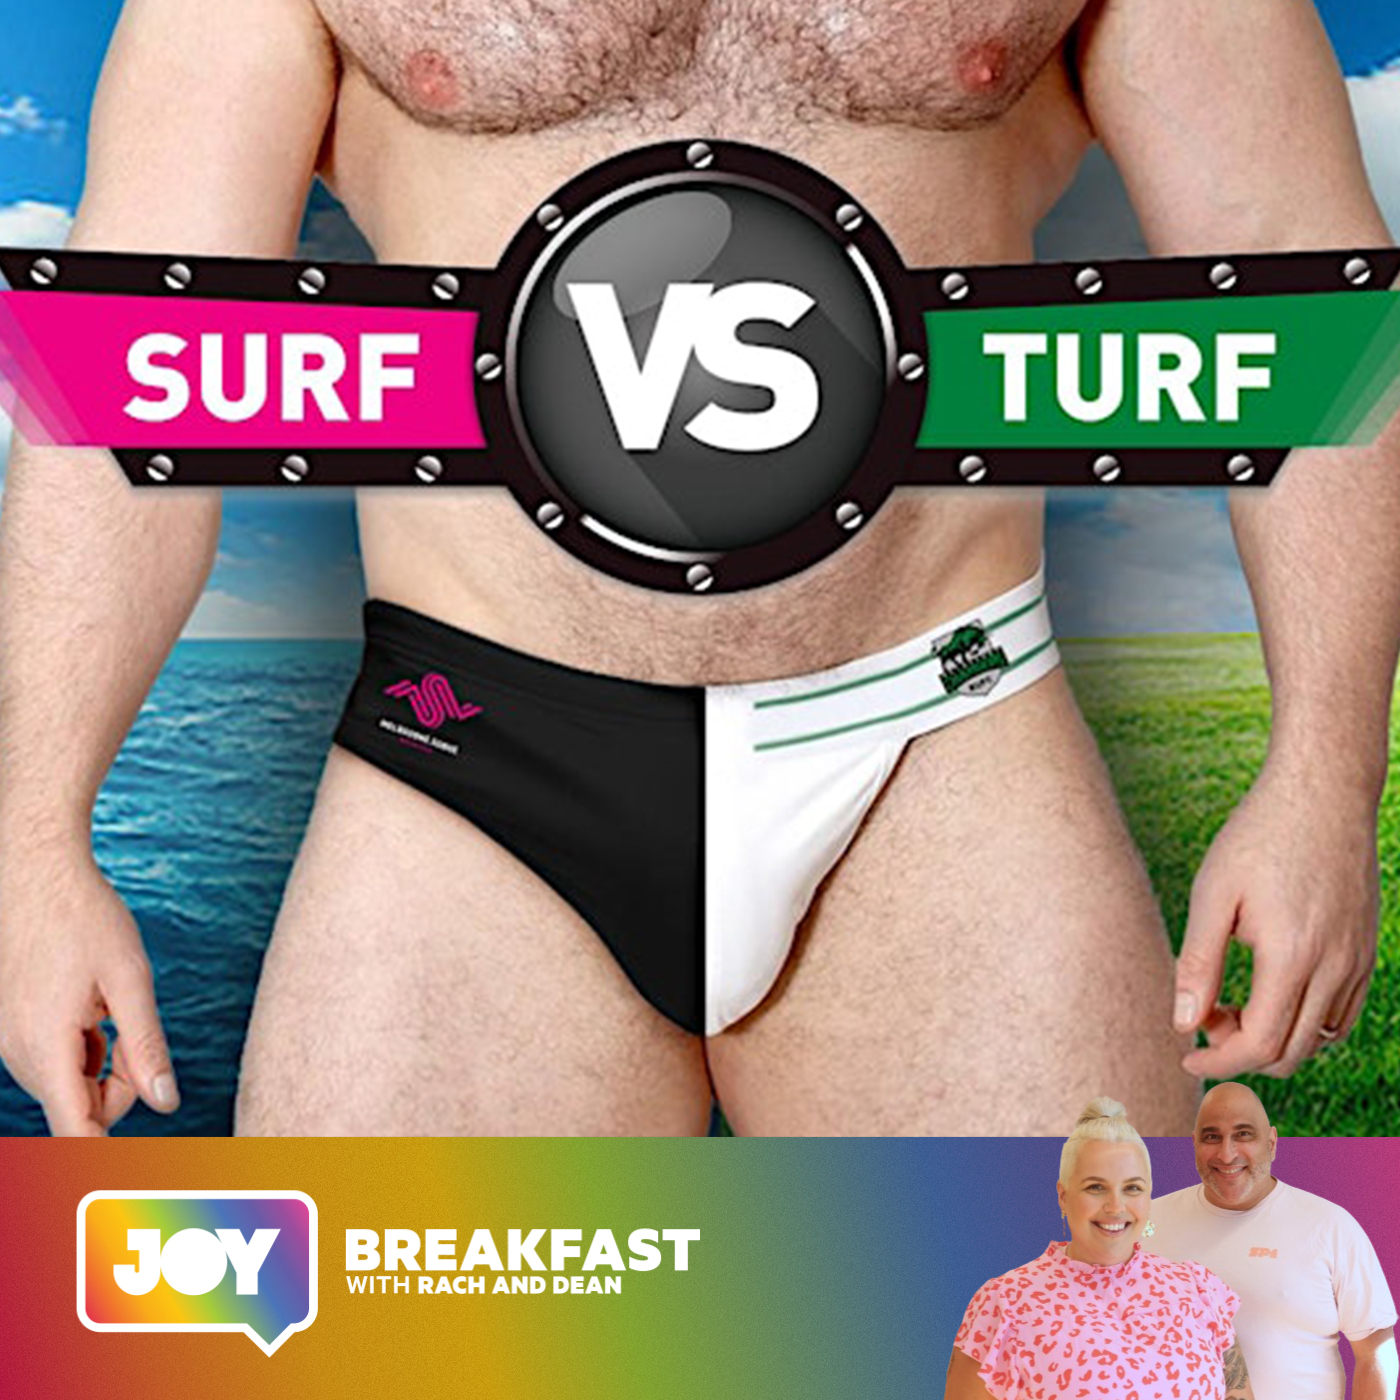 SURF vs TURF brings a whole new level of fun to fundraising!